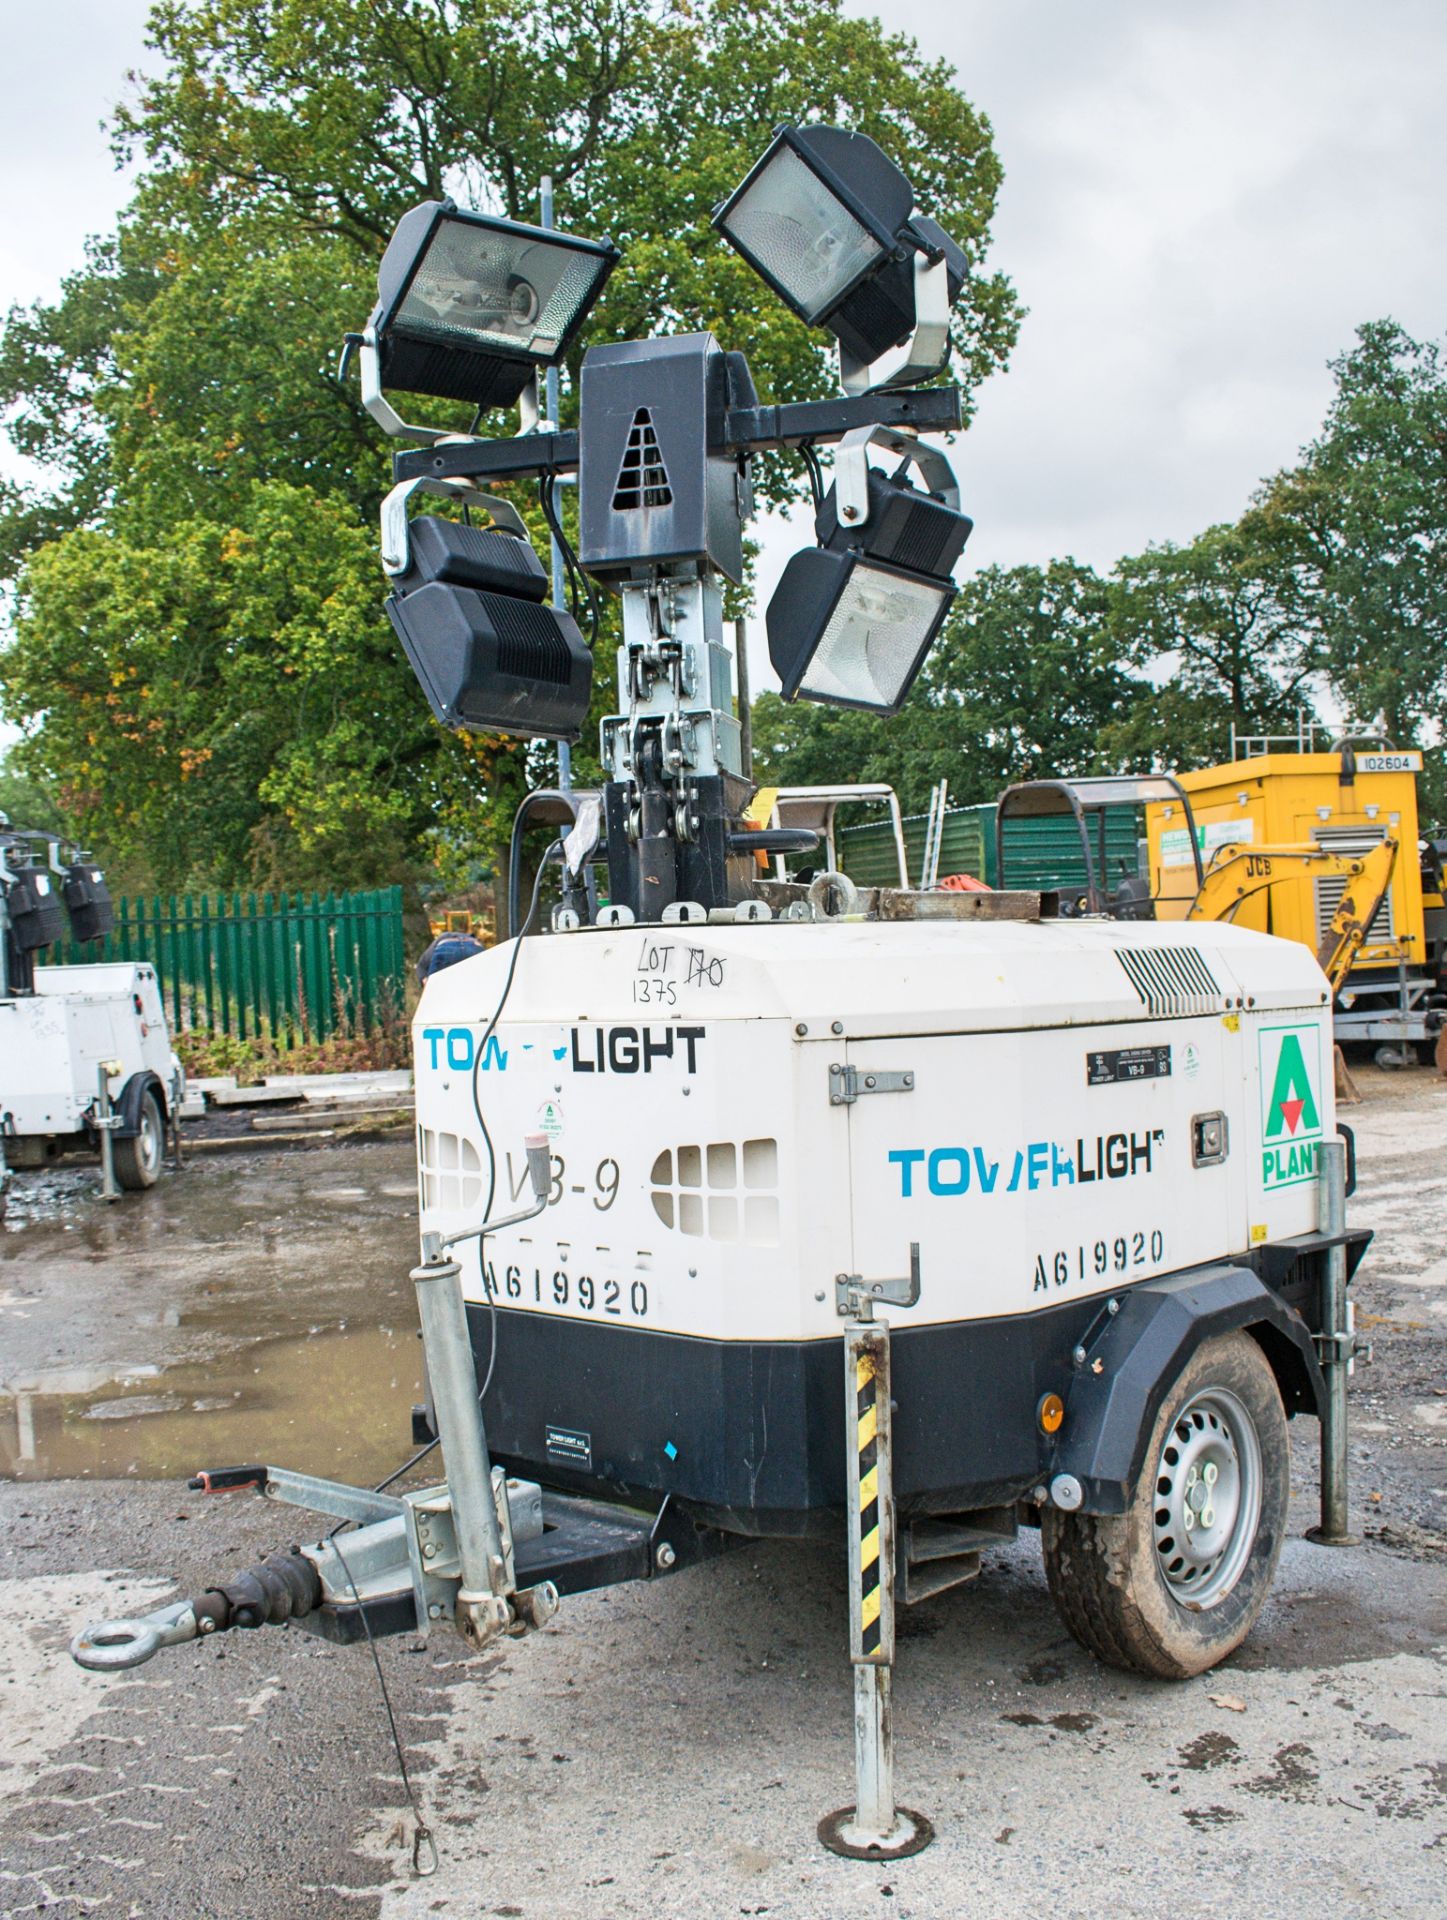 Tower Light VB-9 diesel driven mobile lighting tower Year: 2013 S/N: 1302883 Recorded Hours: A619920 - Image 2 of 9